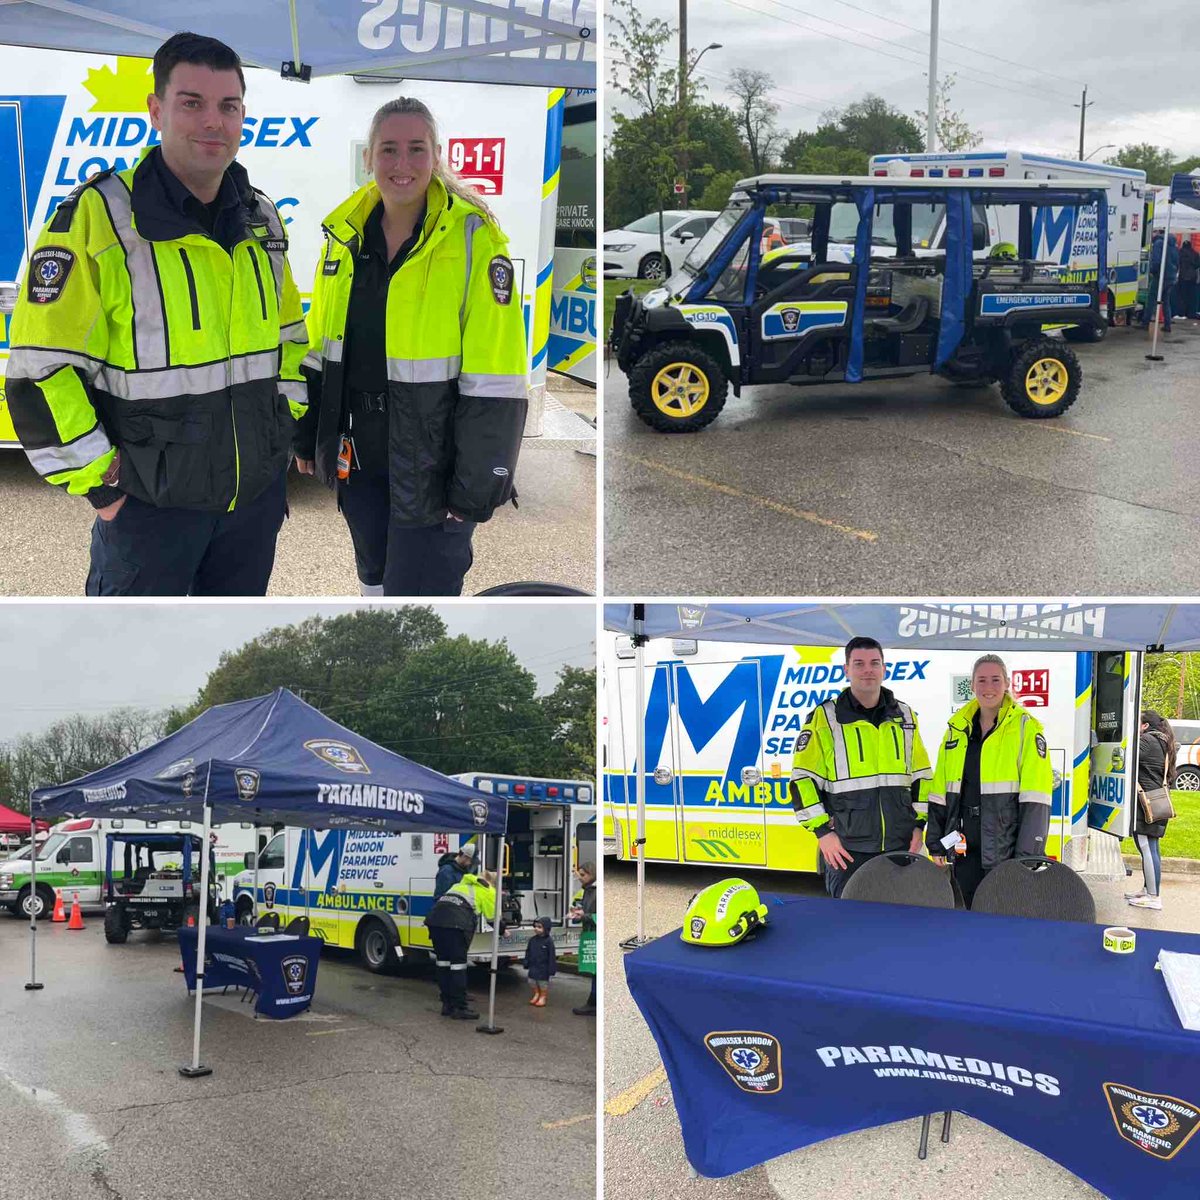 Having a great time at #EPWeek2024 Open House in Byron today! City of London, Ontario - Municipal Government Thank you to everyone who stopped by to visit and learn about Paramedics!